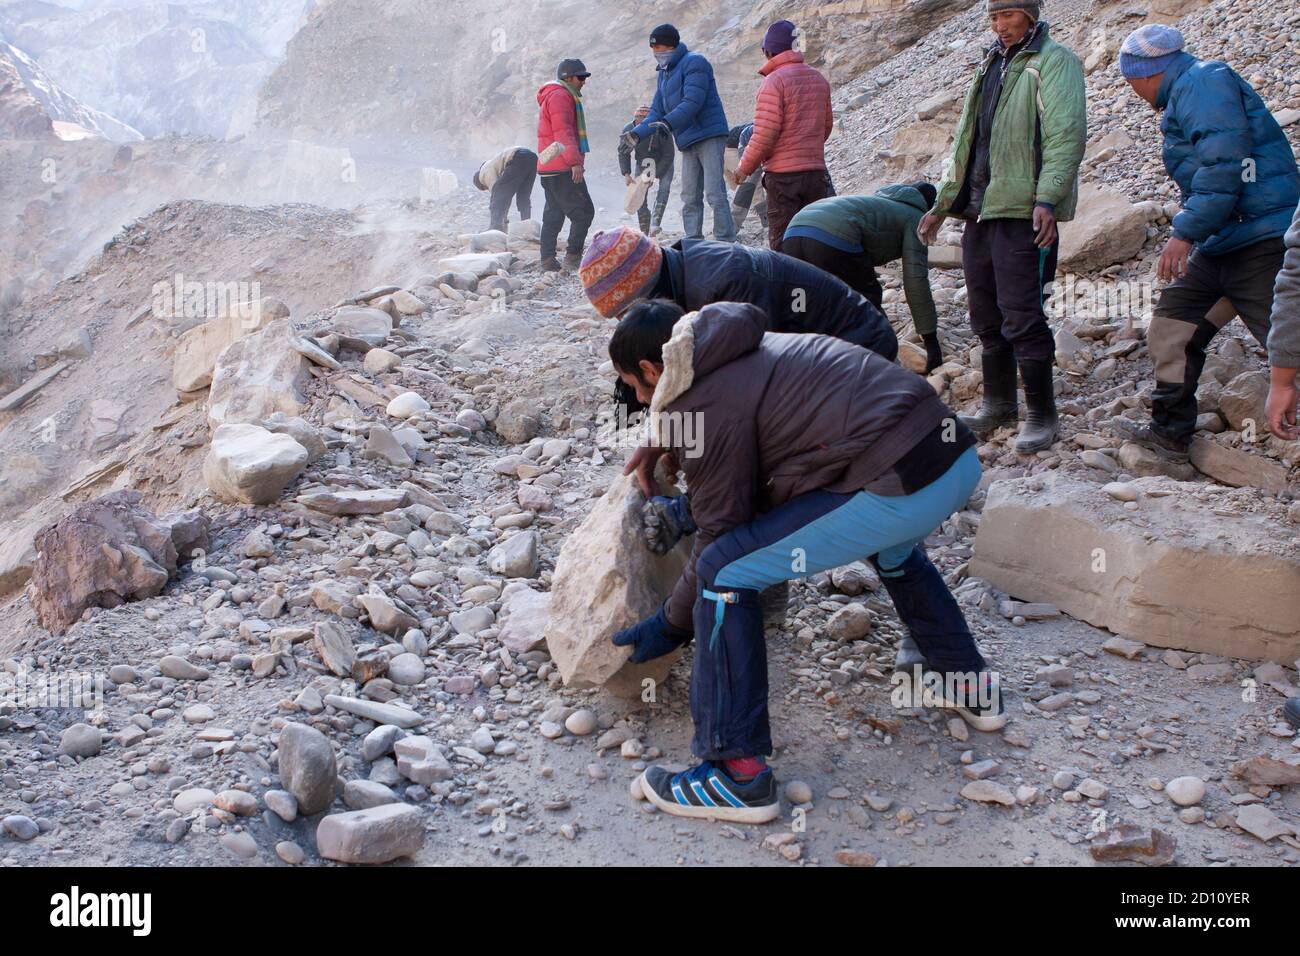 Men moving boulders, clearing road blocked due to land slide in a remote Himalayan high altitude road in Ladakh Stock Photo